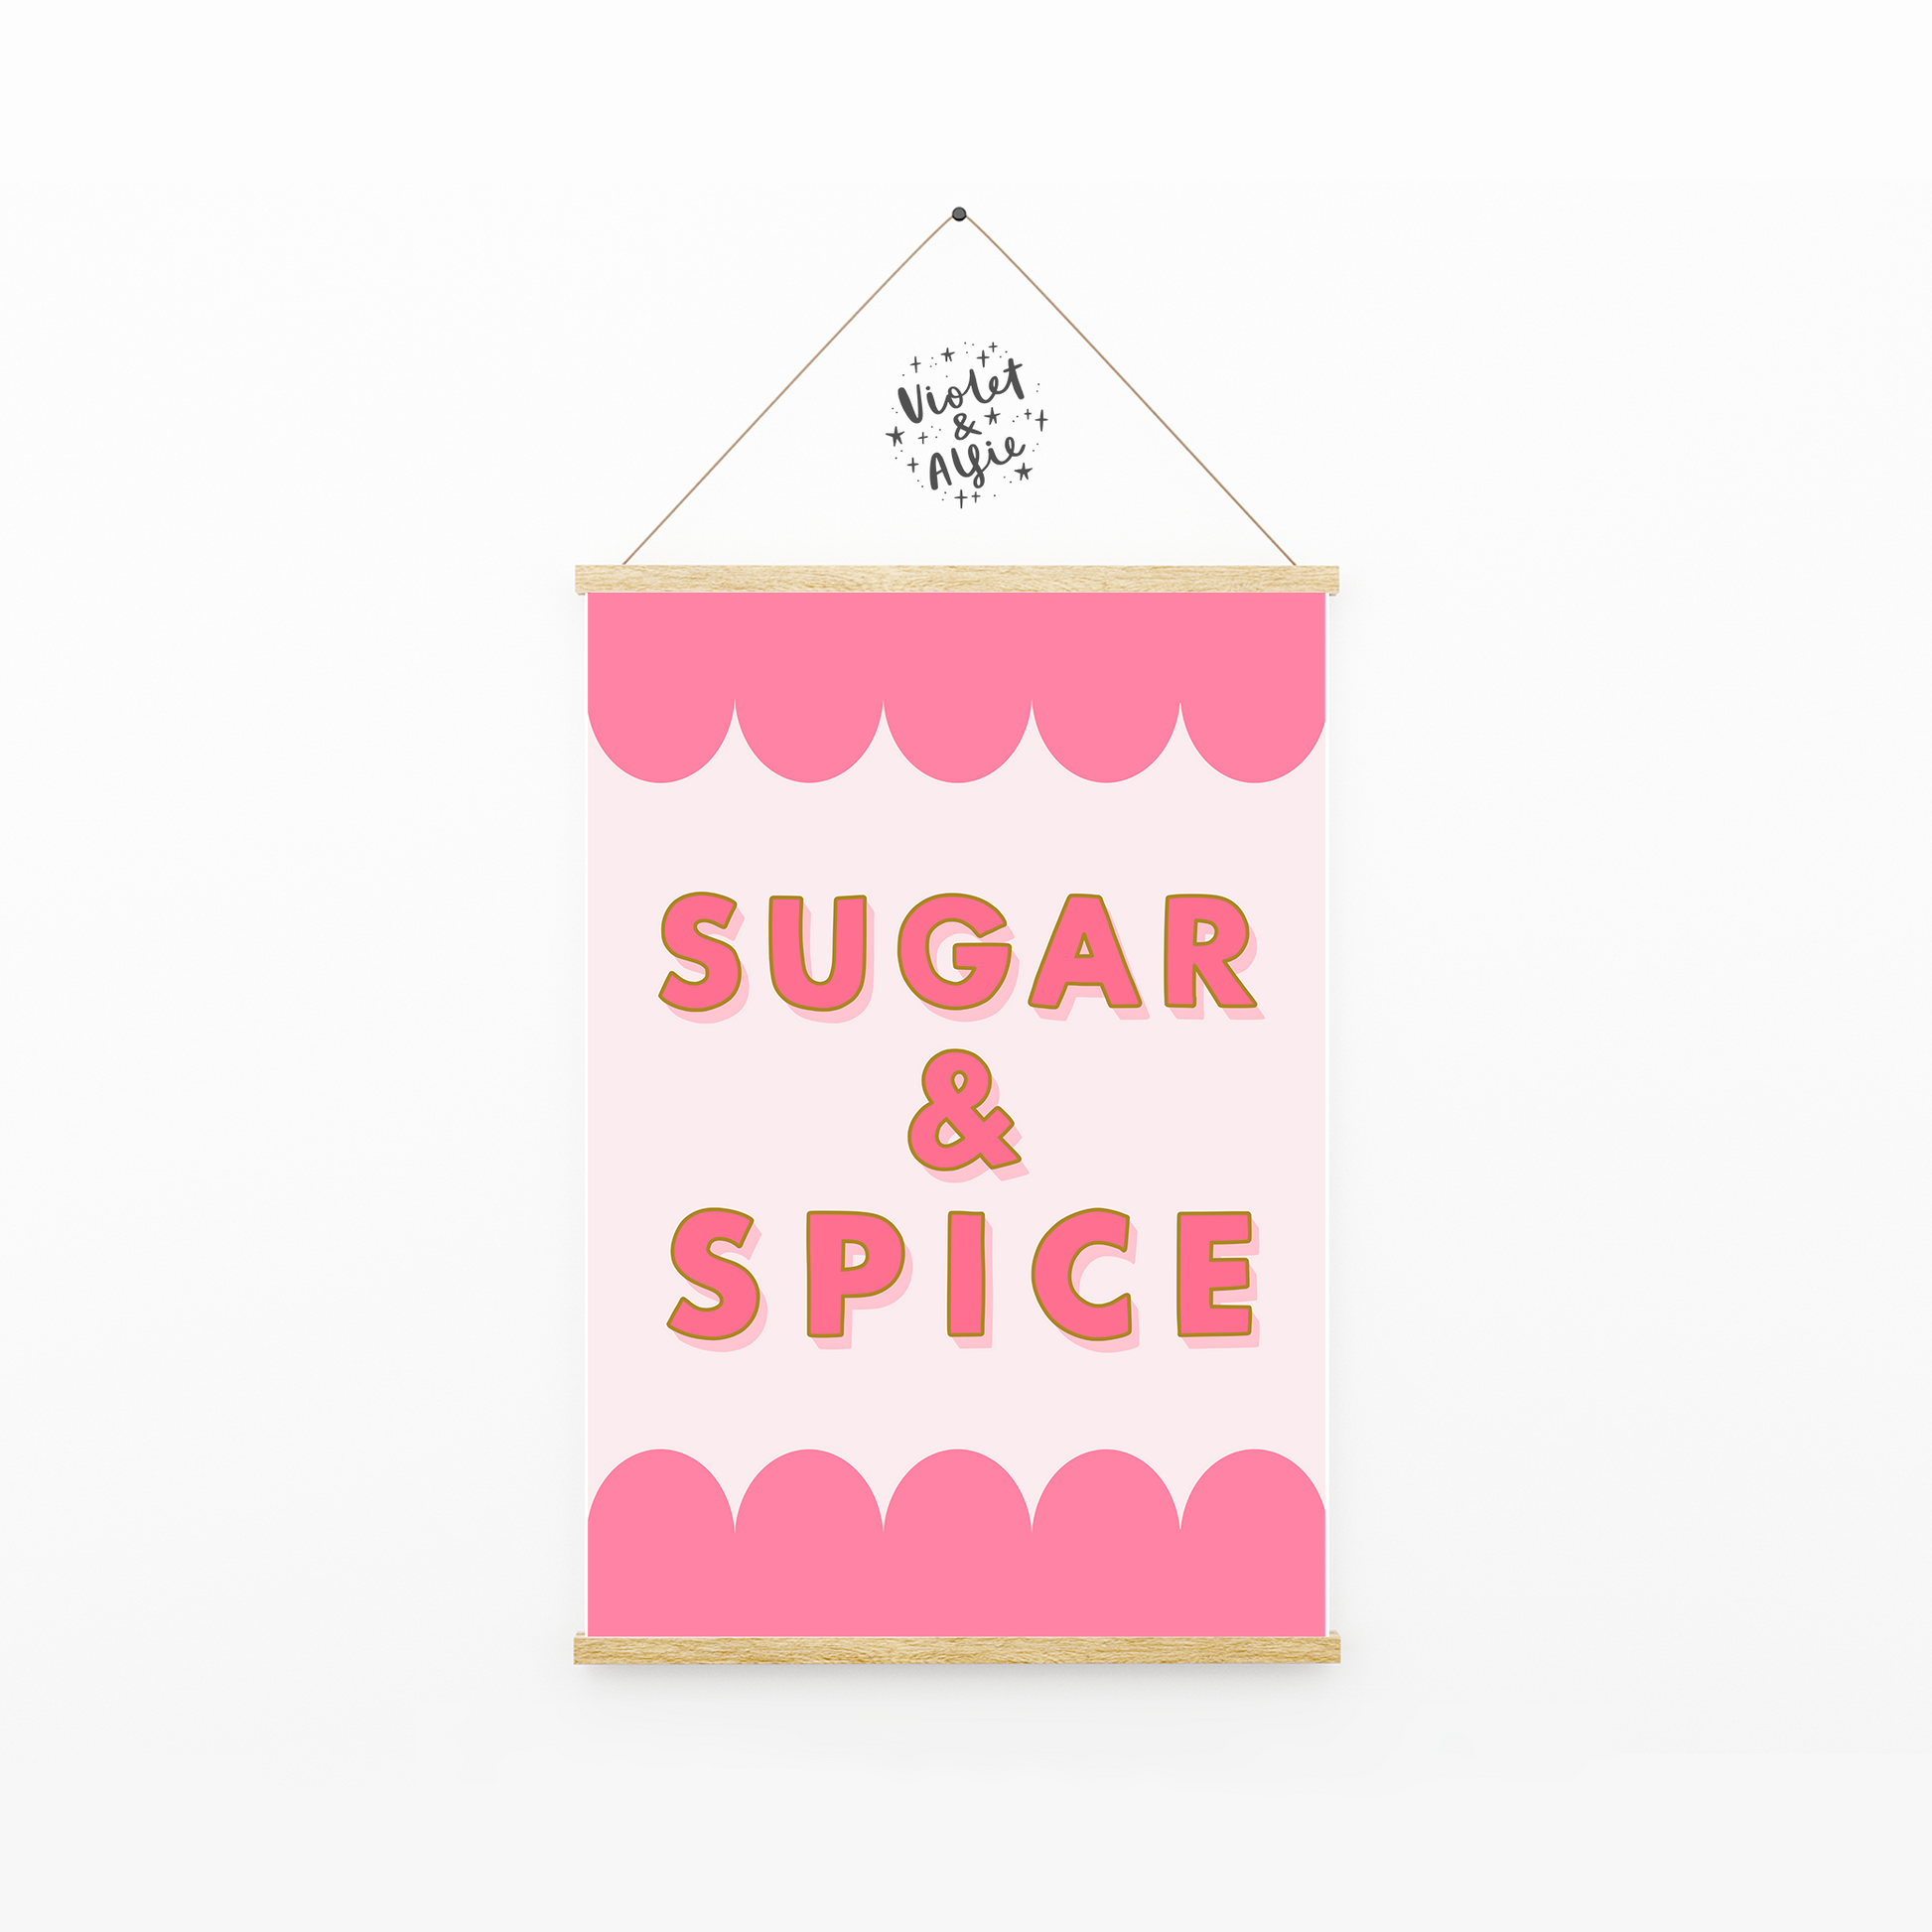 Sugar and Spice typographic print, pink bedroom decor, prints for girl's bedroom, pretty pink decor, pink wall art, young girl's room decor uk